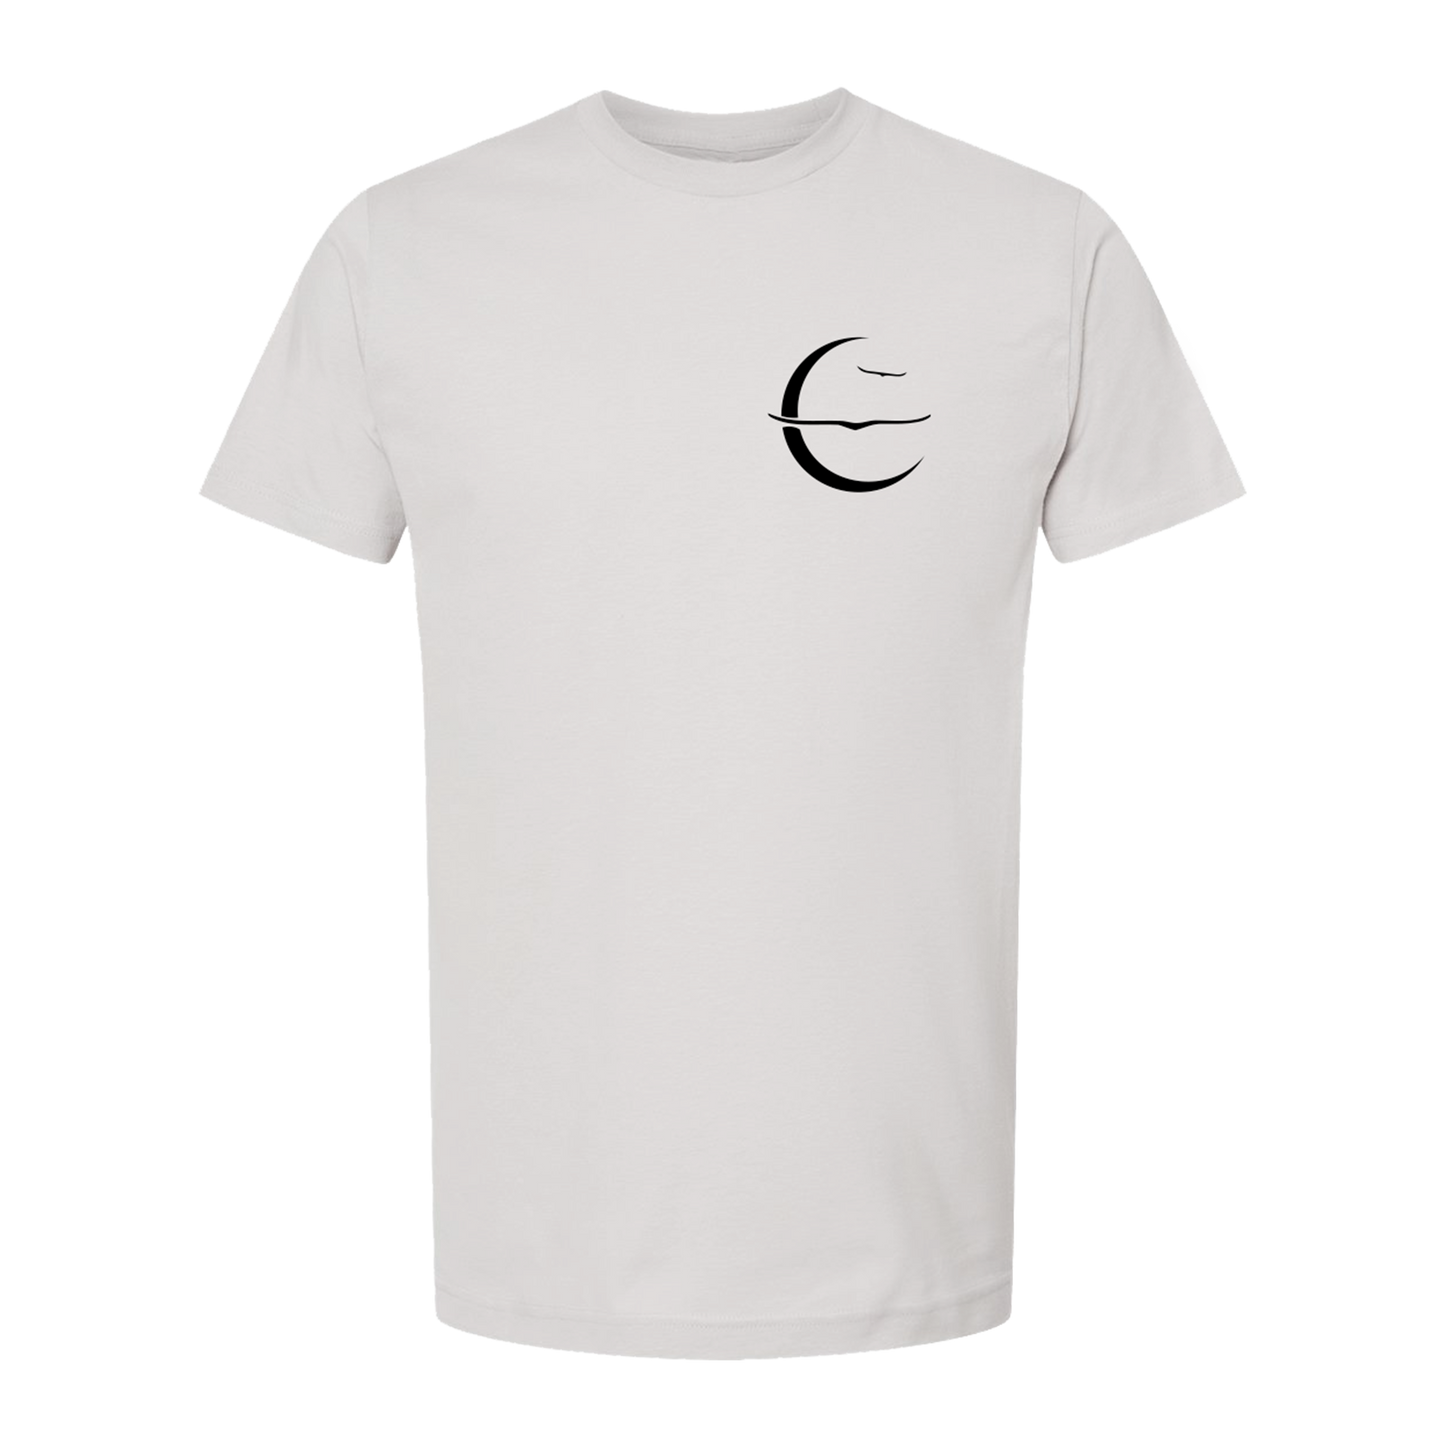 To The Moon Tour T-Shirt